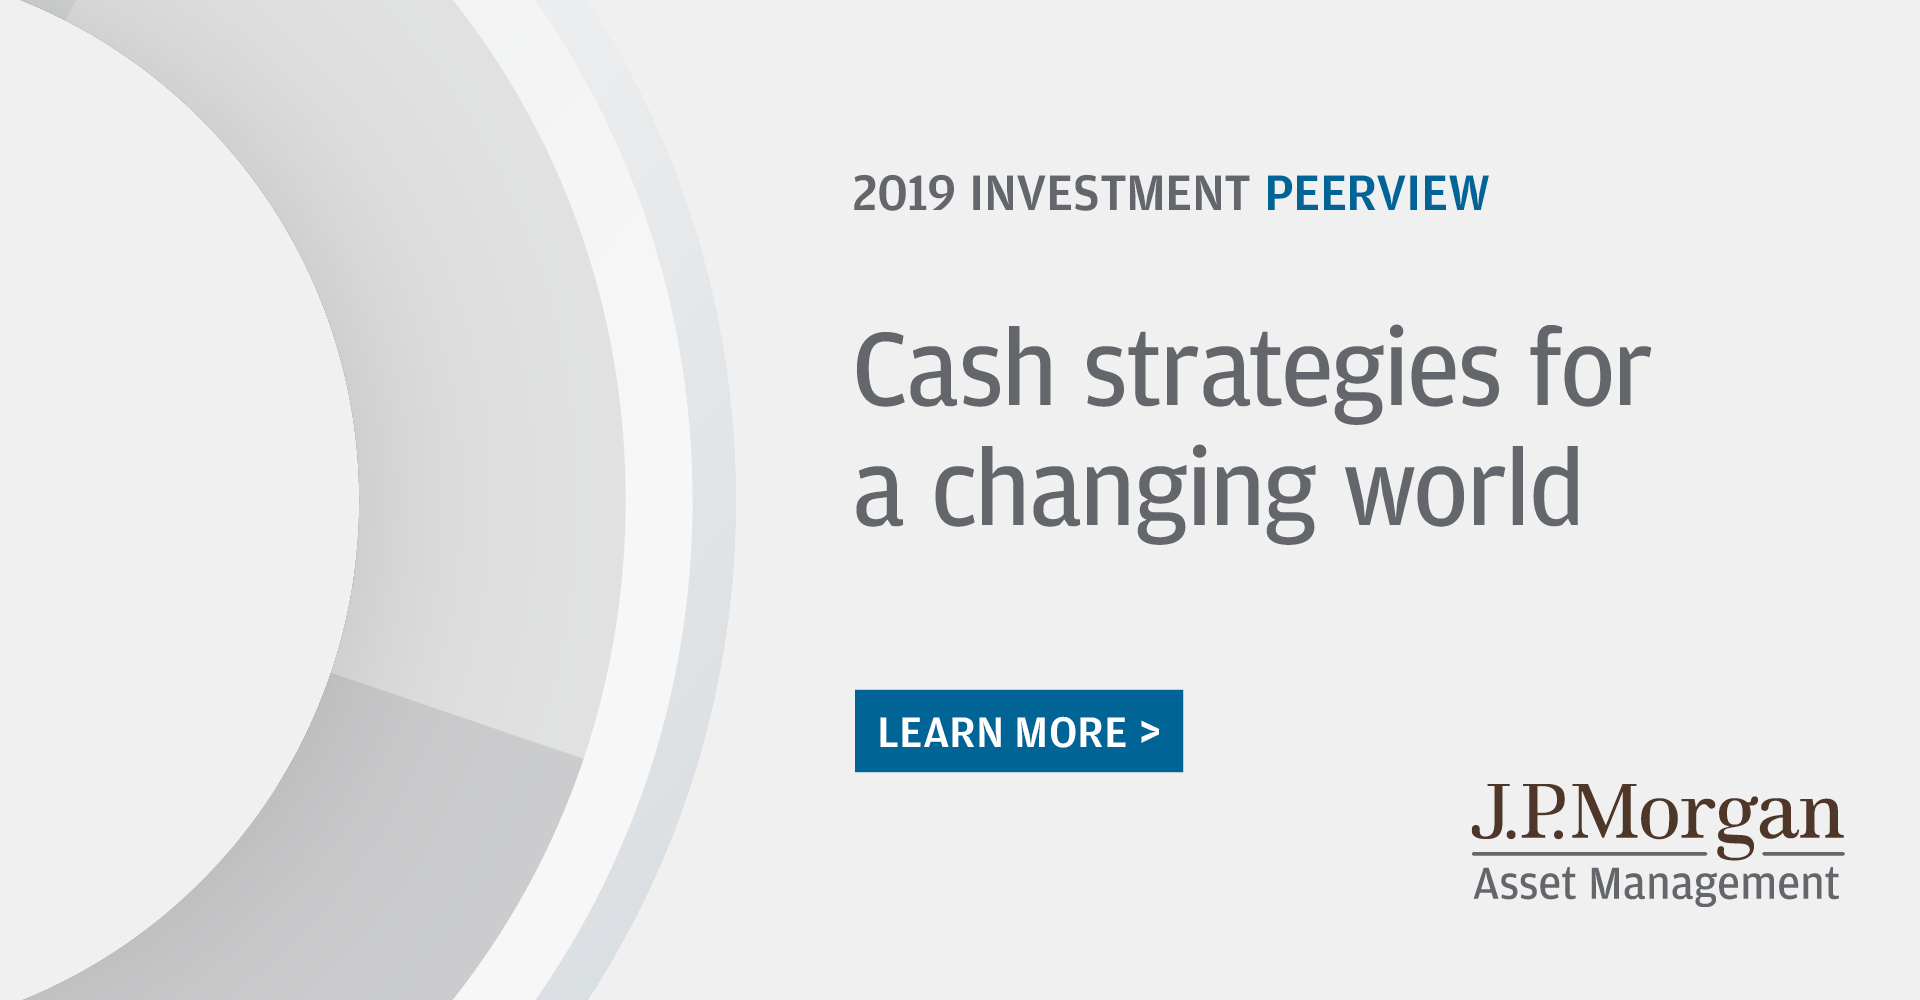 J.P. Morgan Asset Management – 2019 Investment PeerView – Cash strategies for a changing world